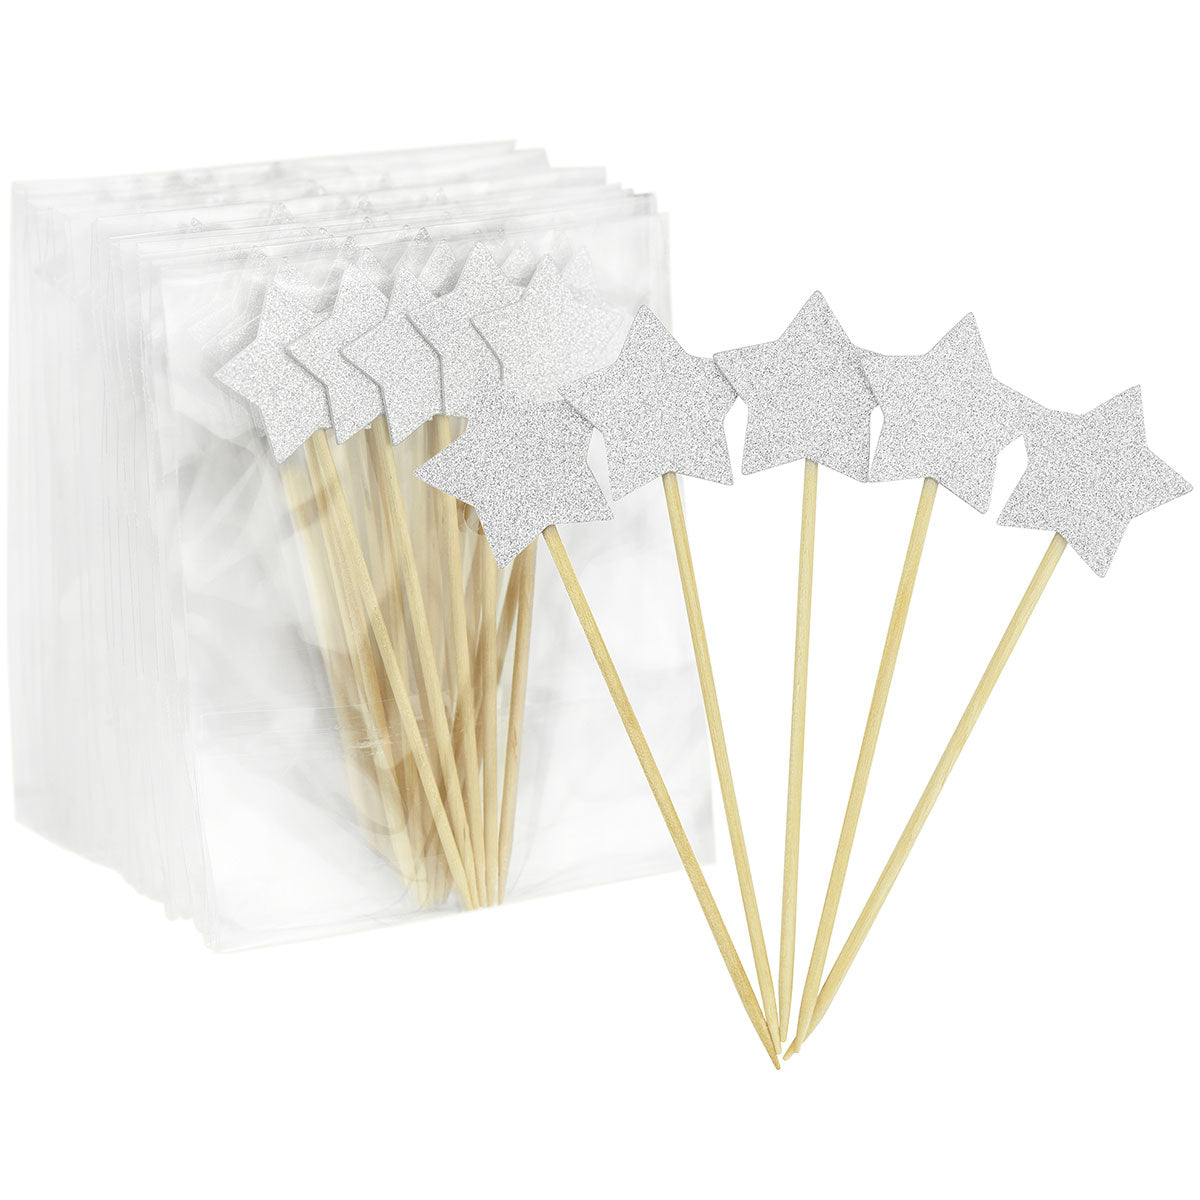 Silver Glitter Star Cake Toppers 50 Pcs